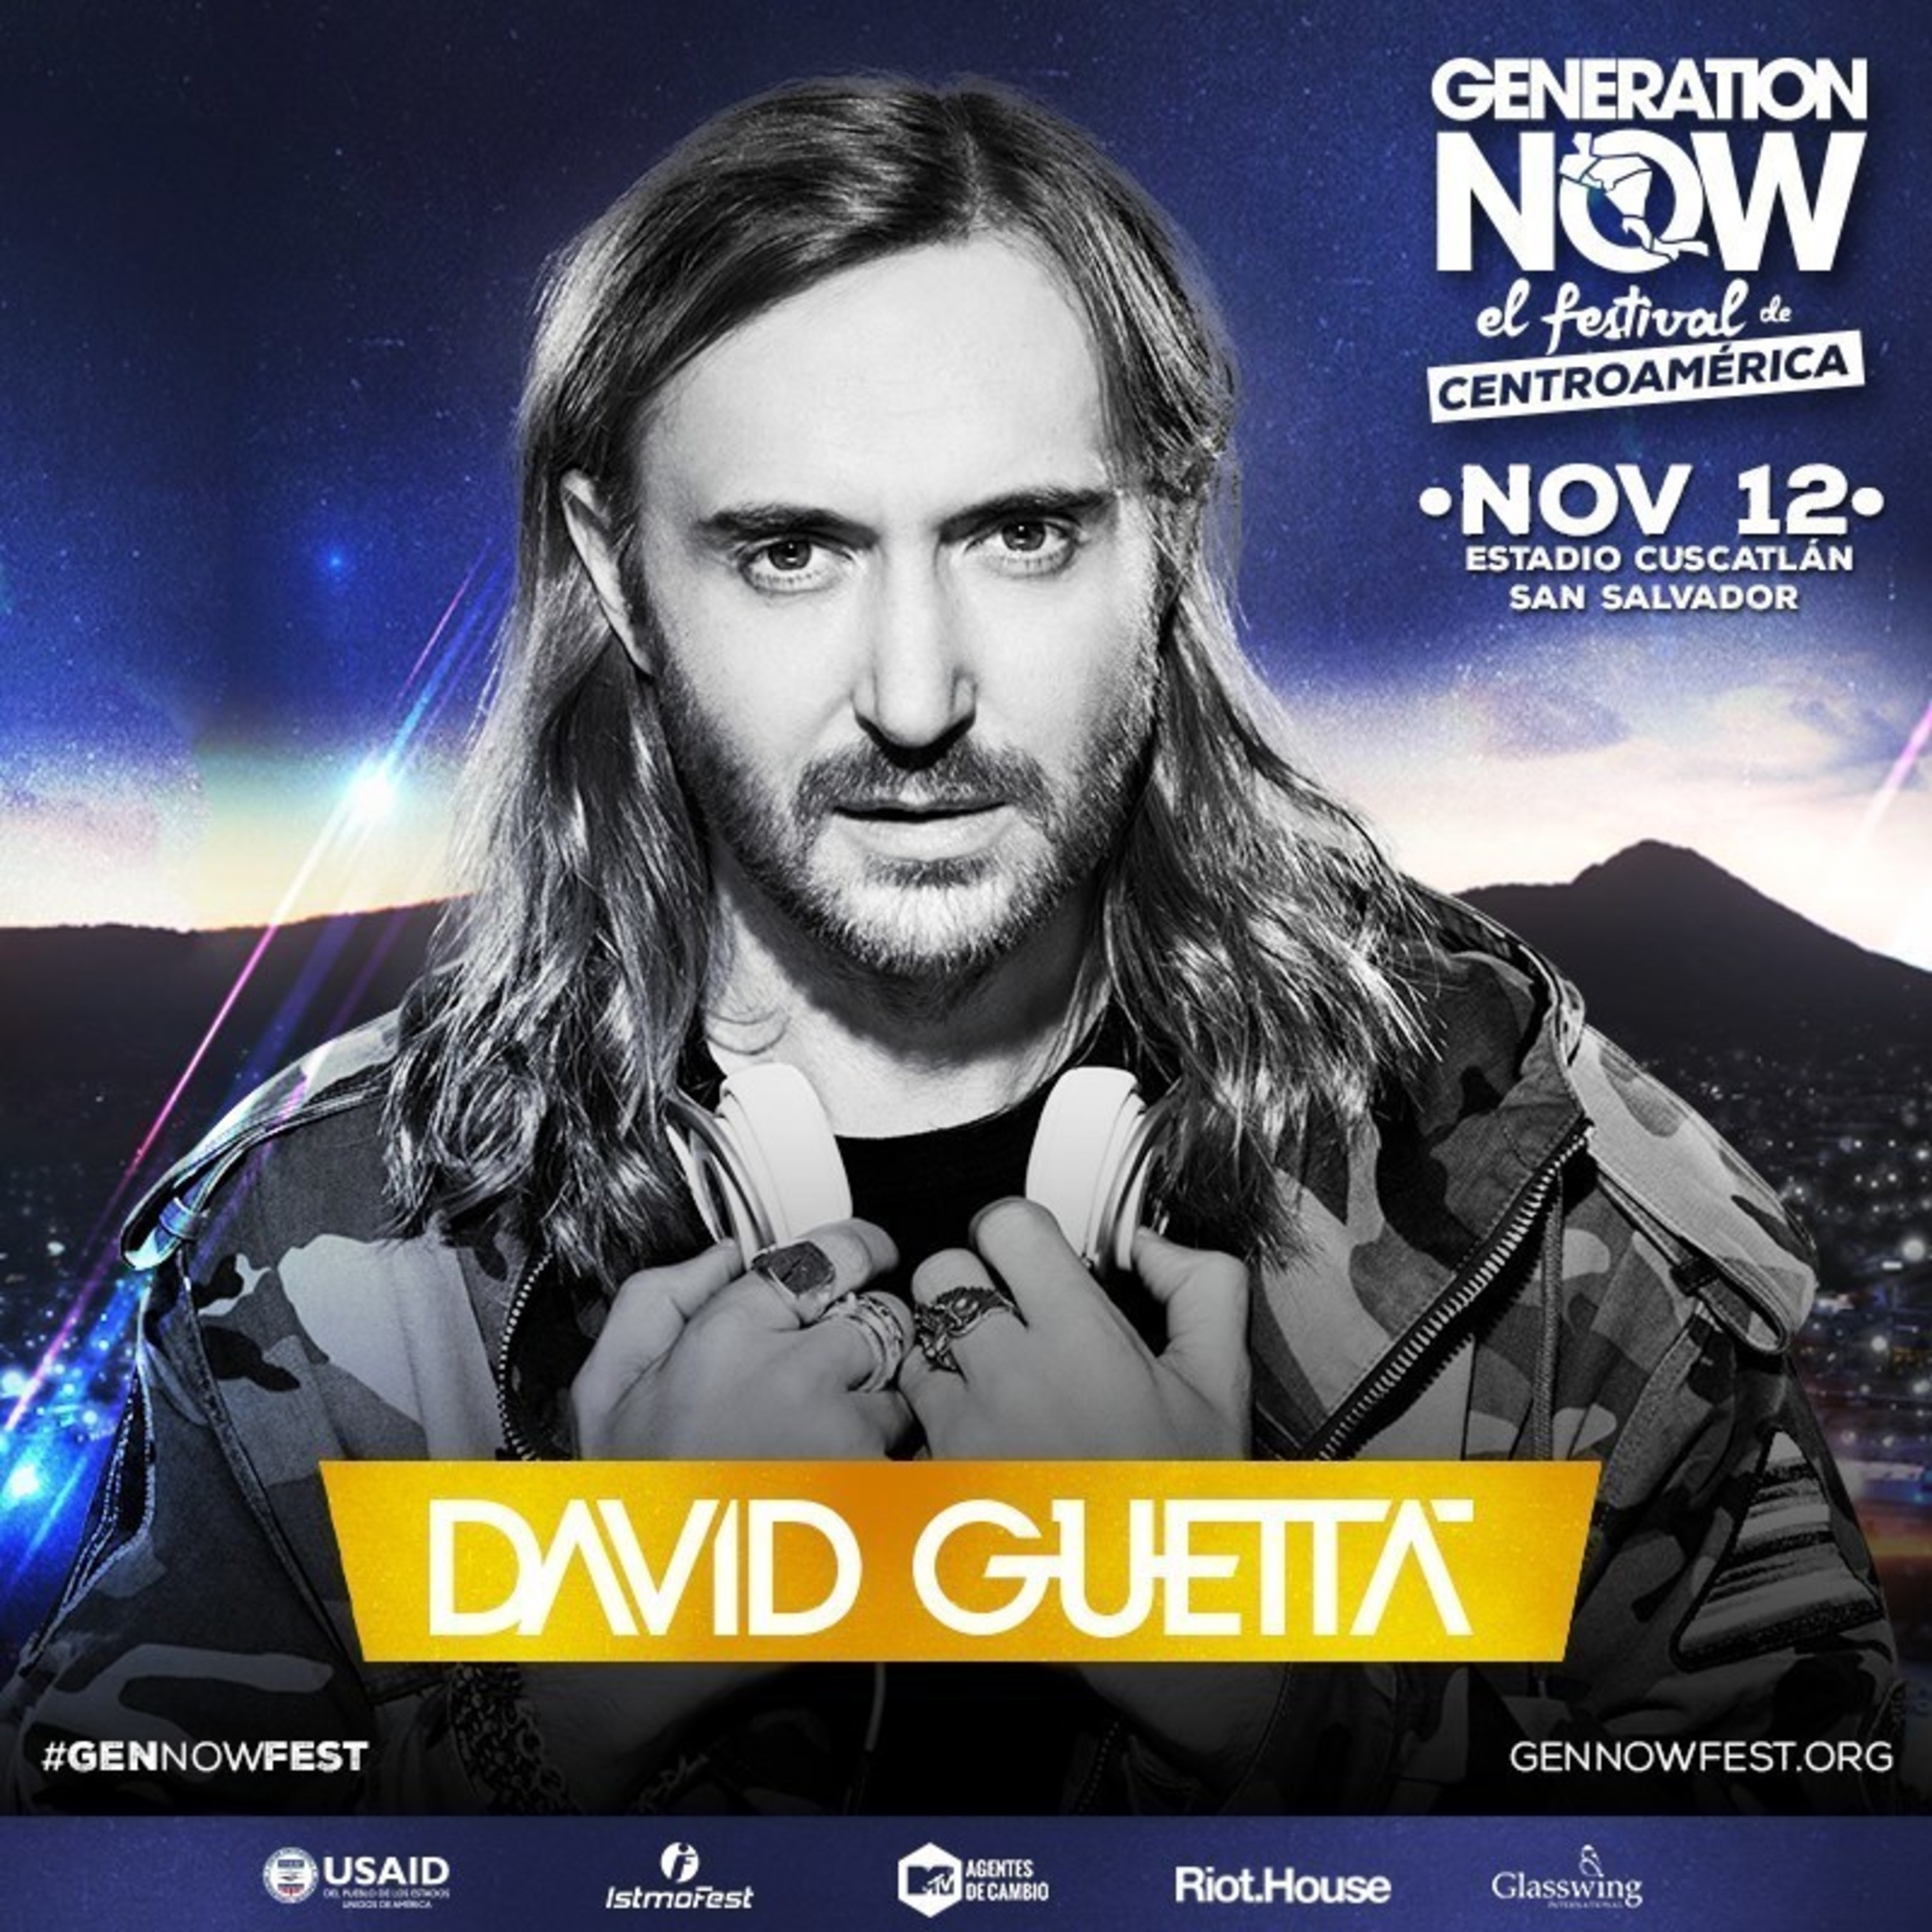 David Guetta joins Generation Now youth festival for Central America